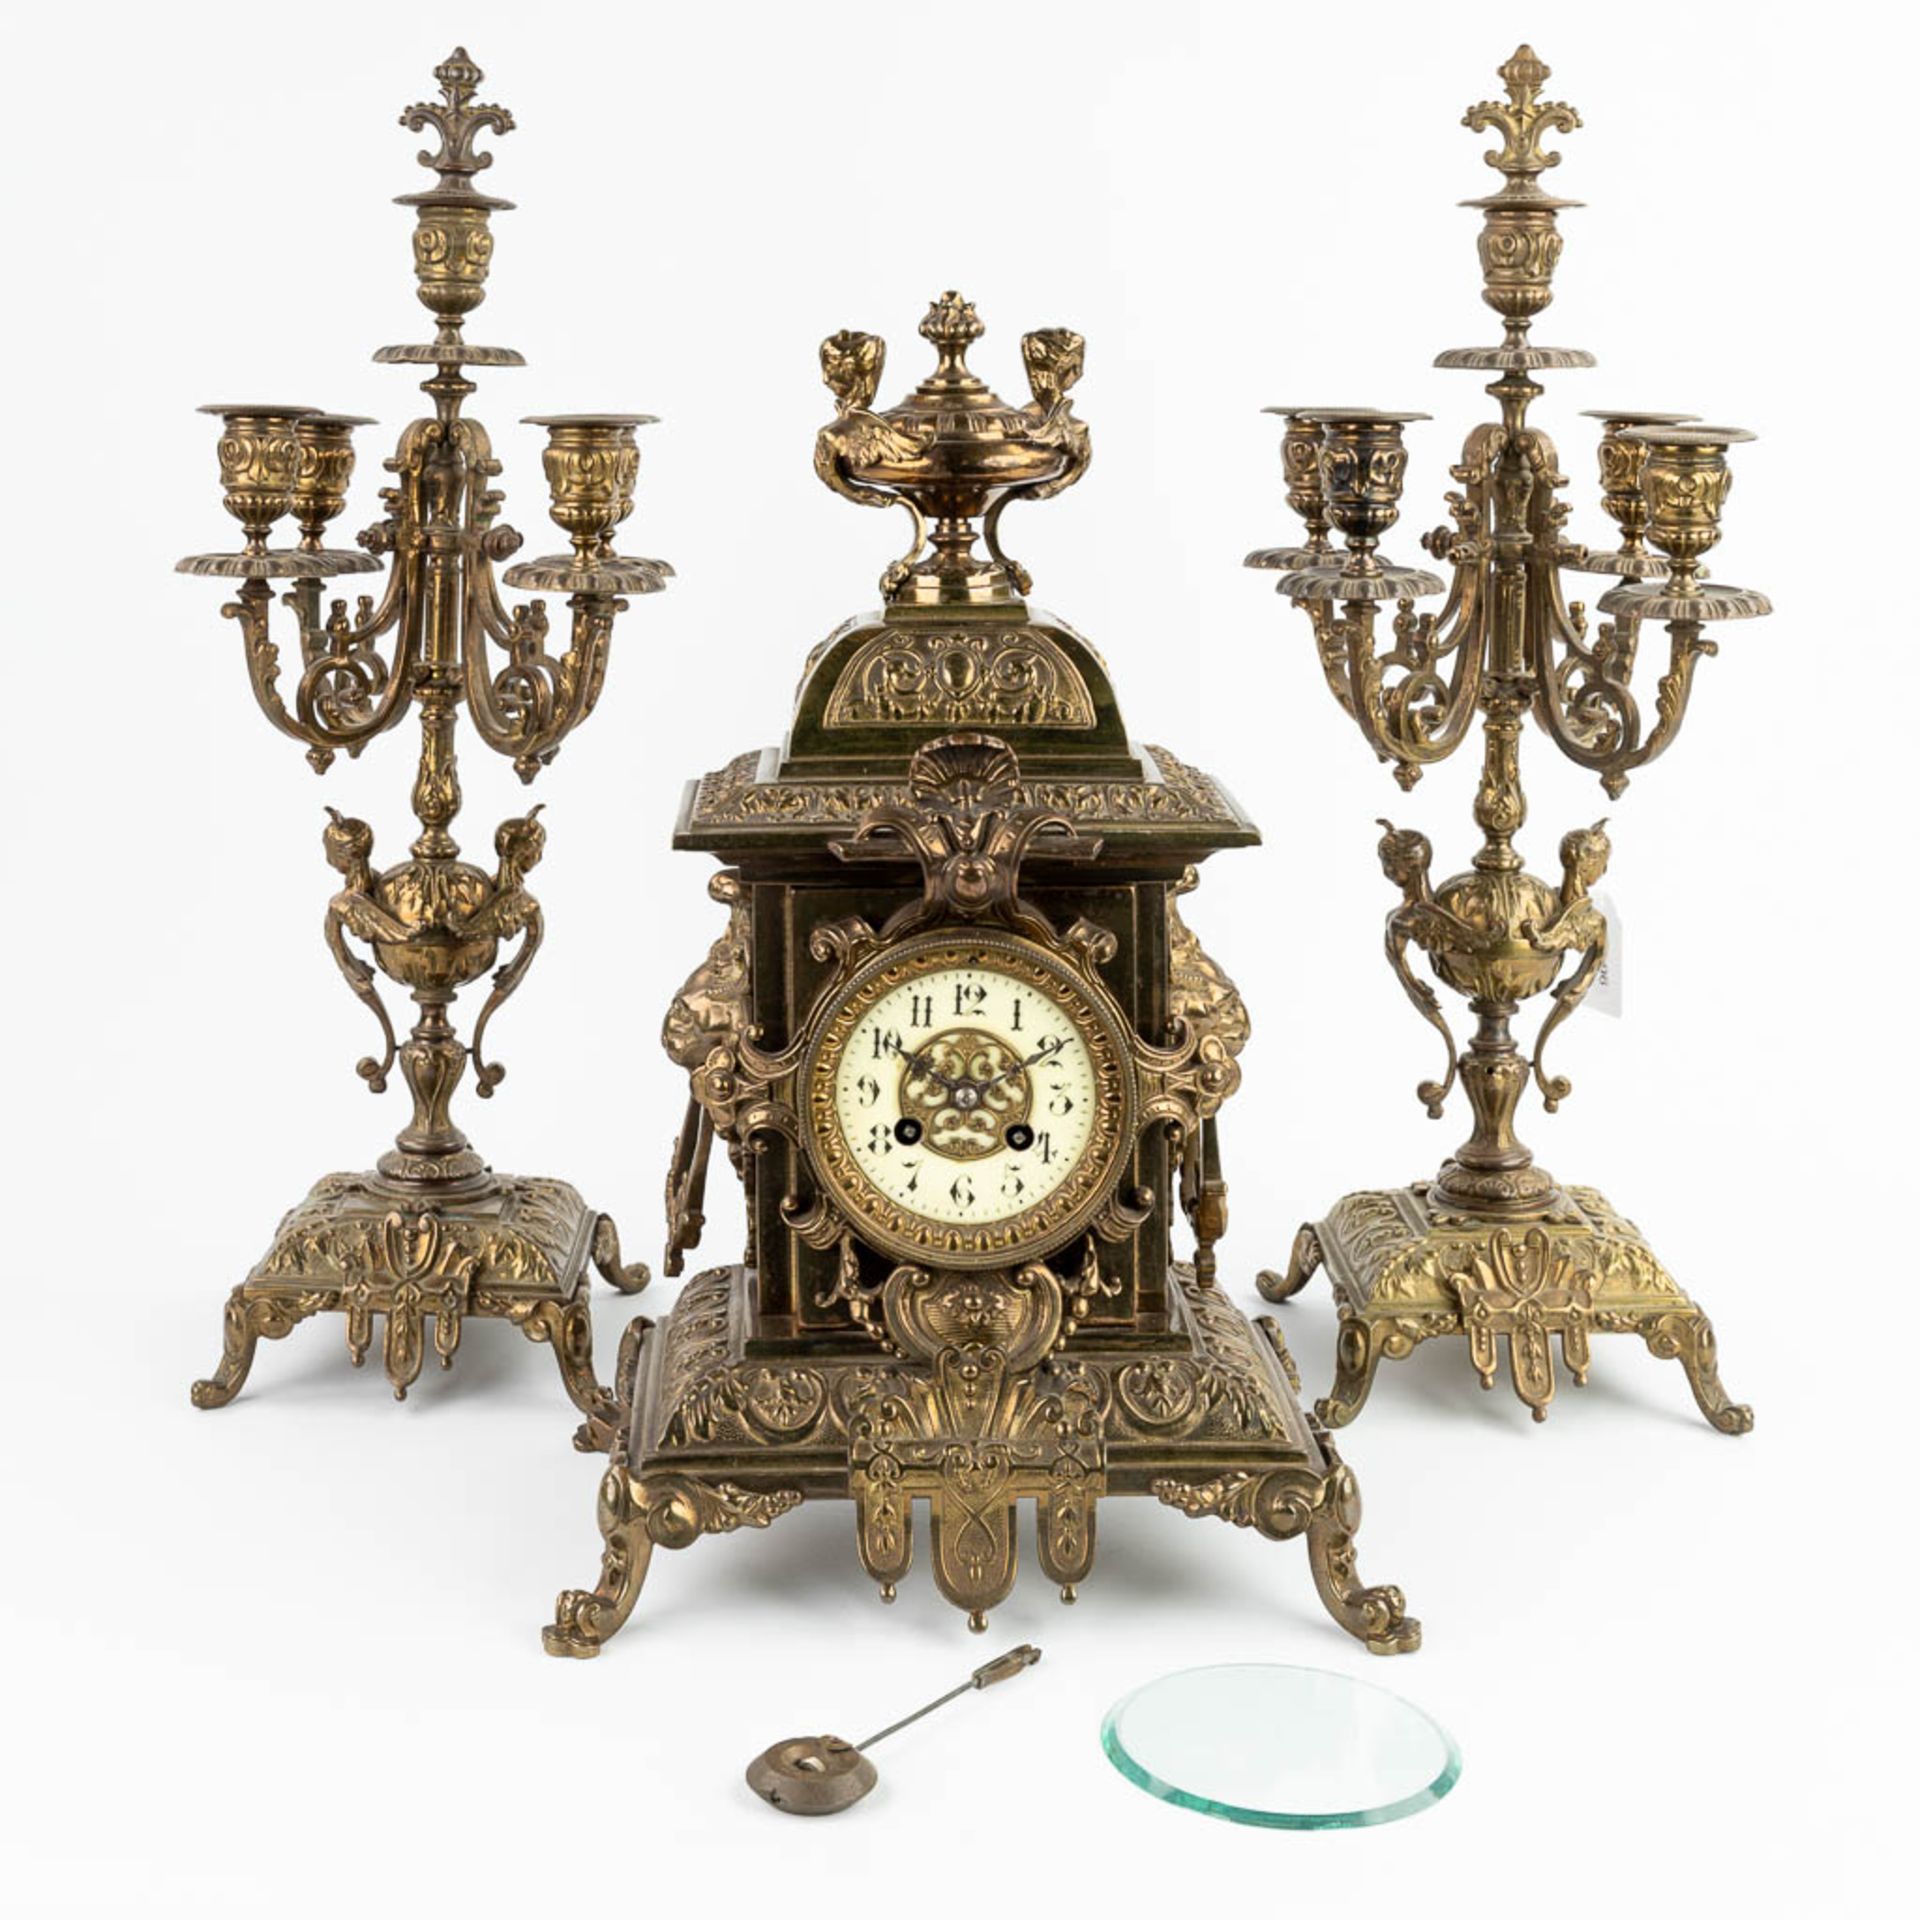 A three-piece mantle garniture clock and candelabra, made of bronze. (20 x 29 x 45cm) - Image 13 of 17